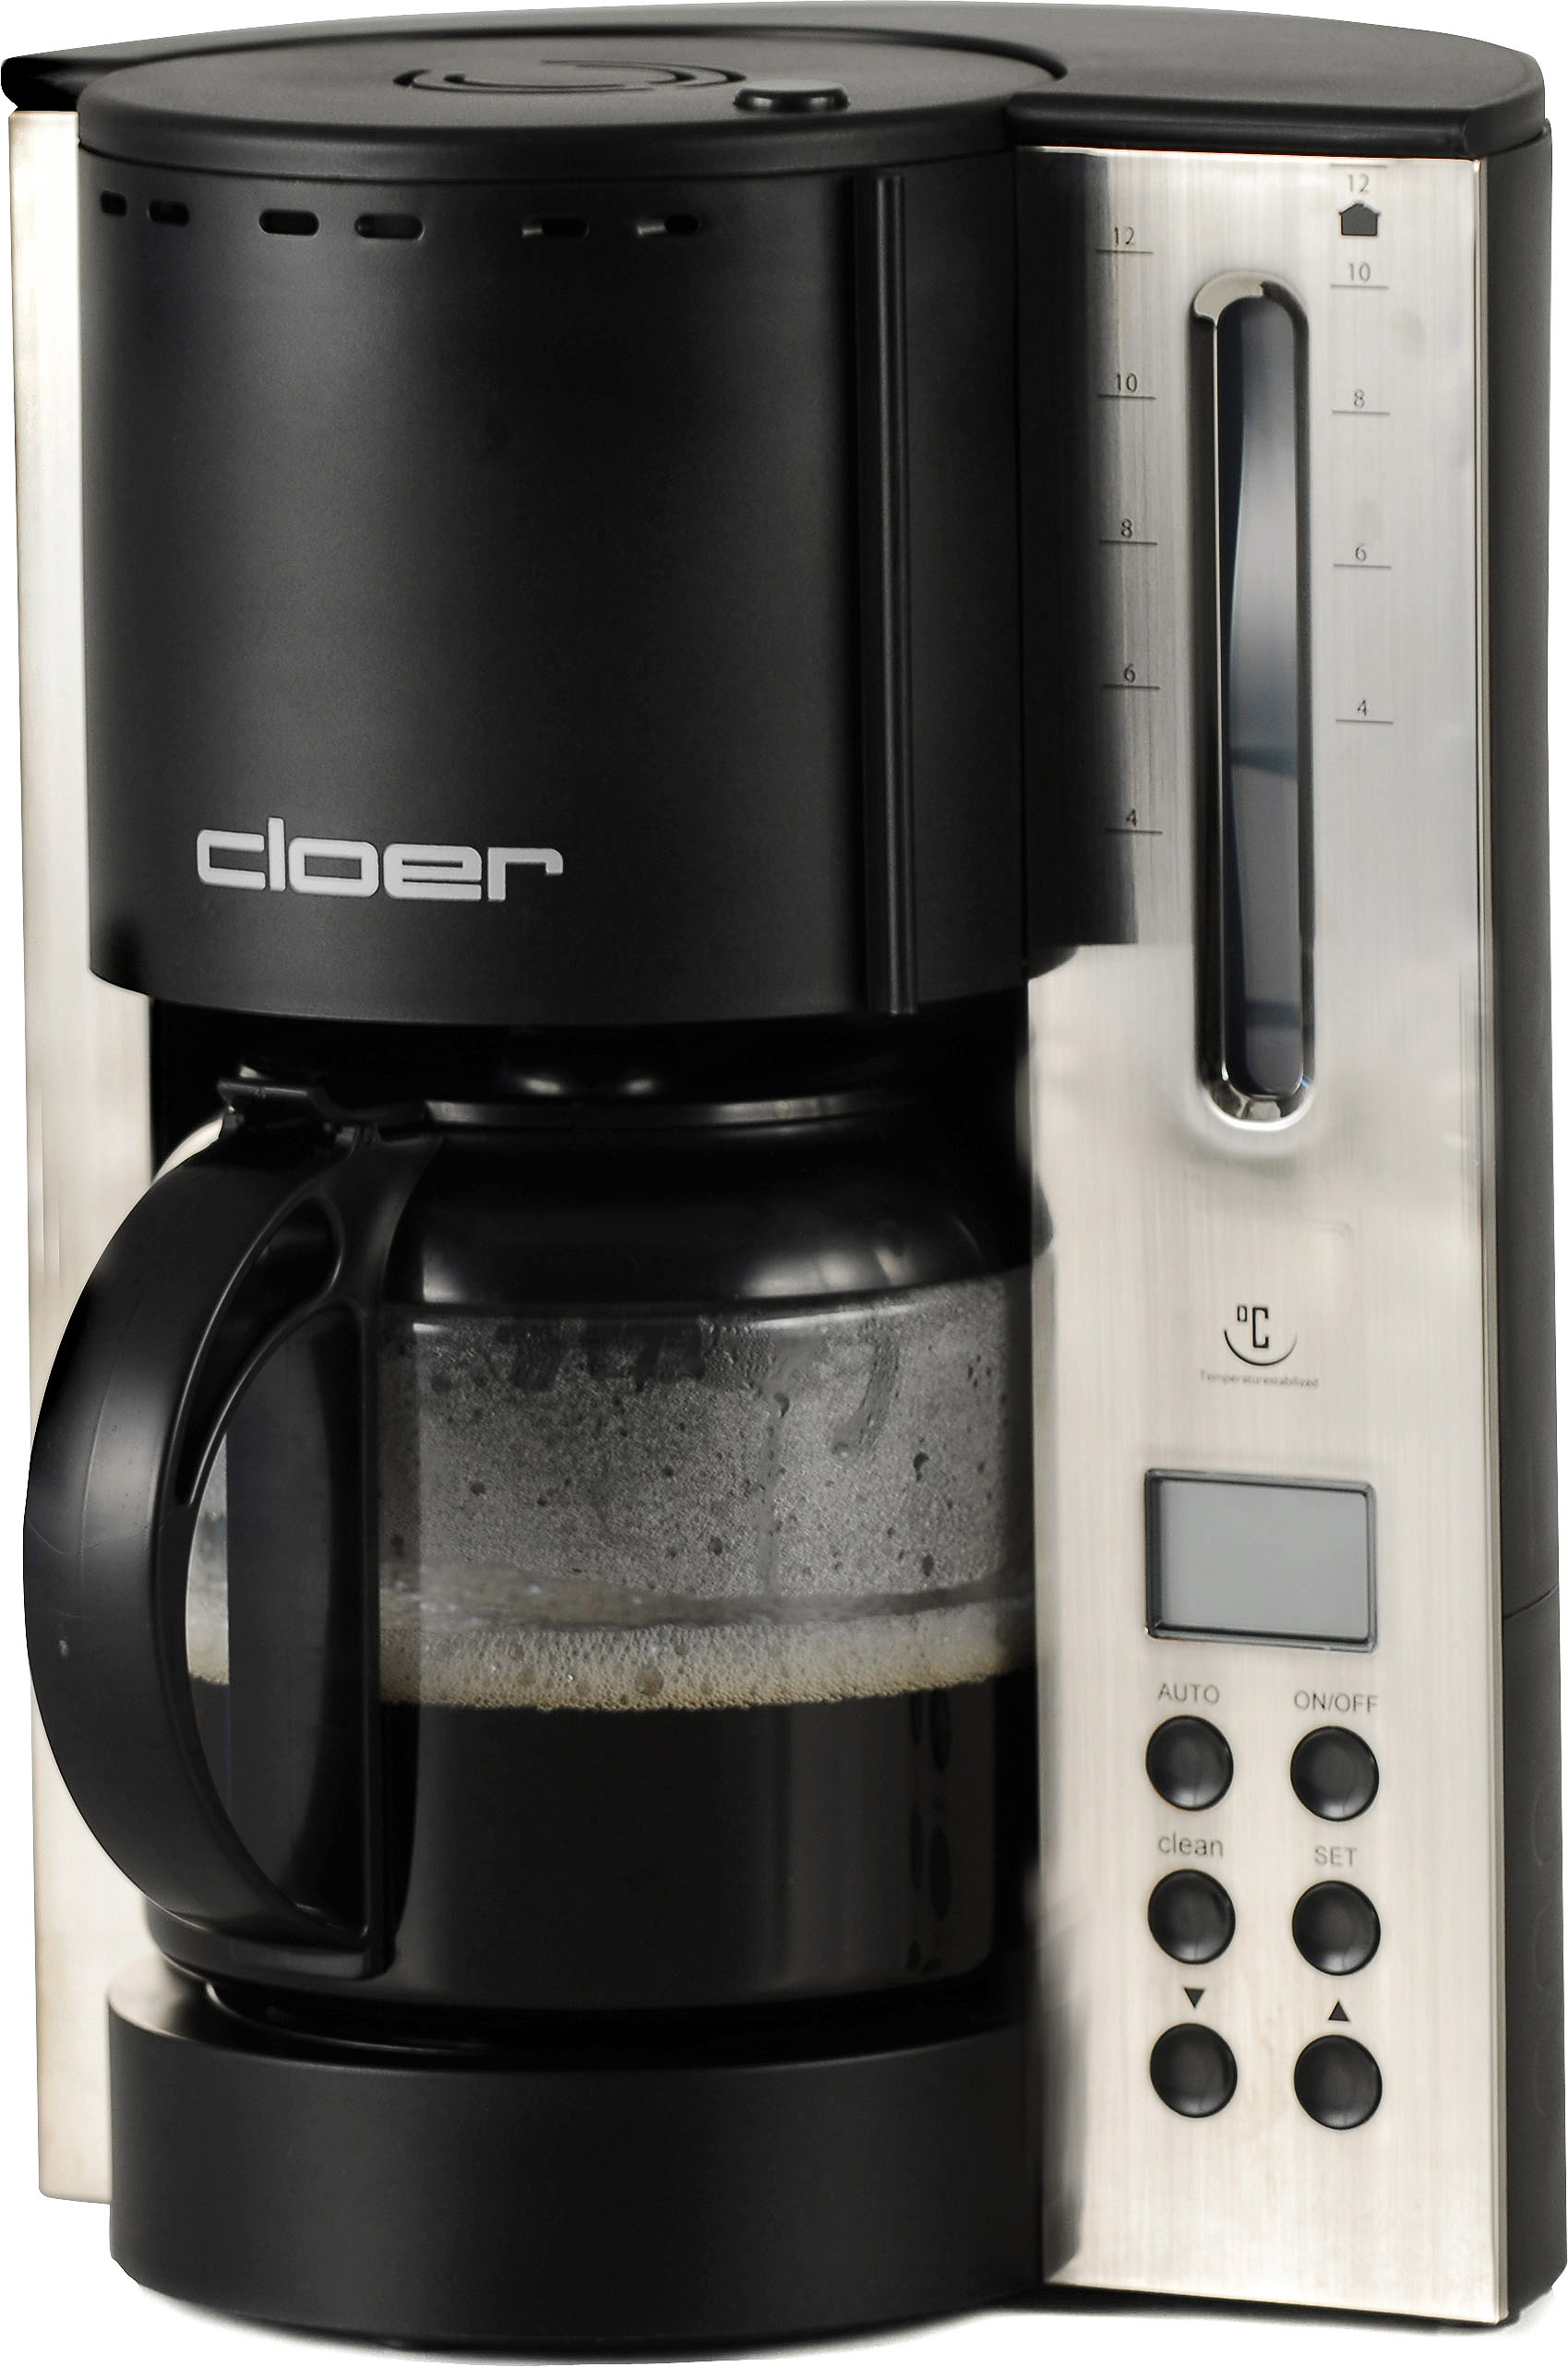 Cloer 52 12-Cup Bitterness-Eliminating Coffee Maker